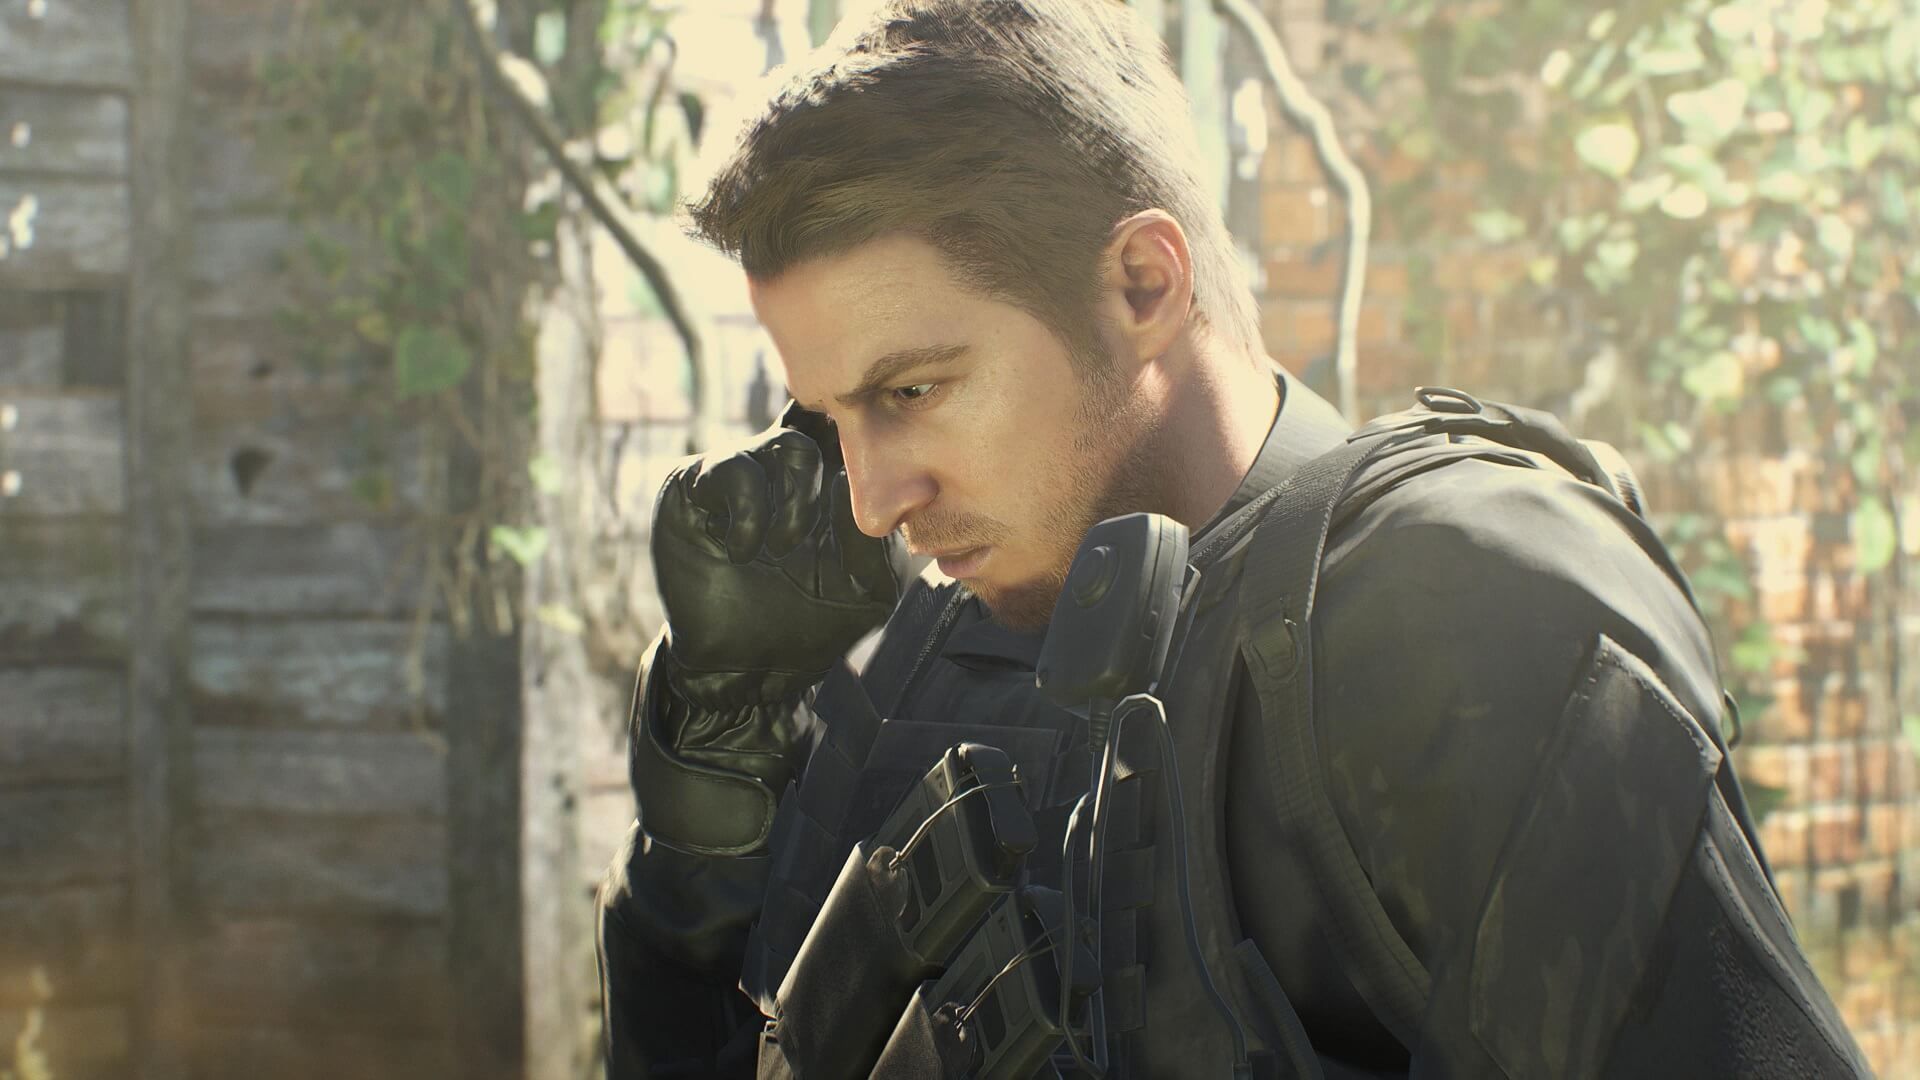 Resident Evil 8 rumoured to be titled “Village, ” featuring a villainous Chris Redfield